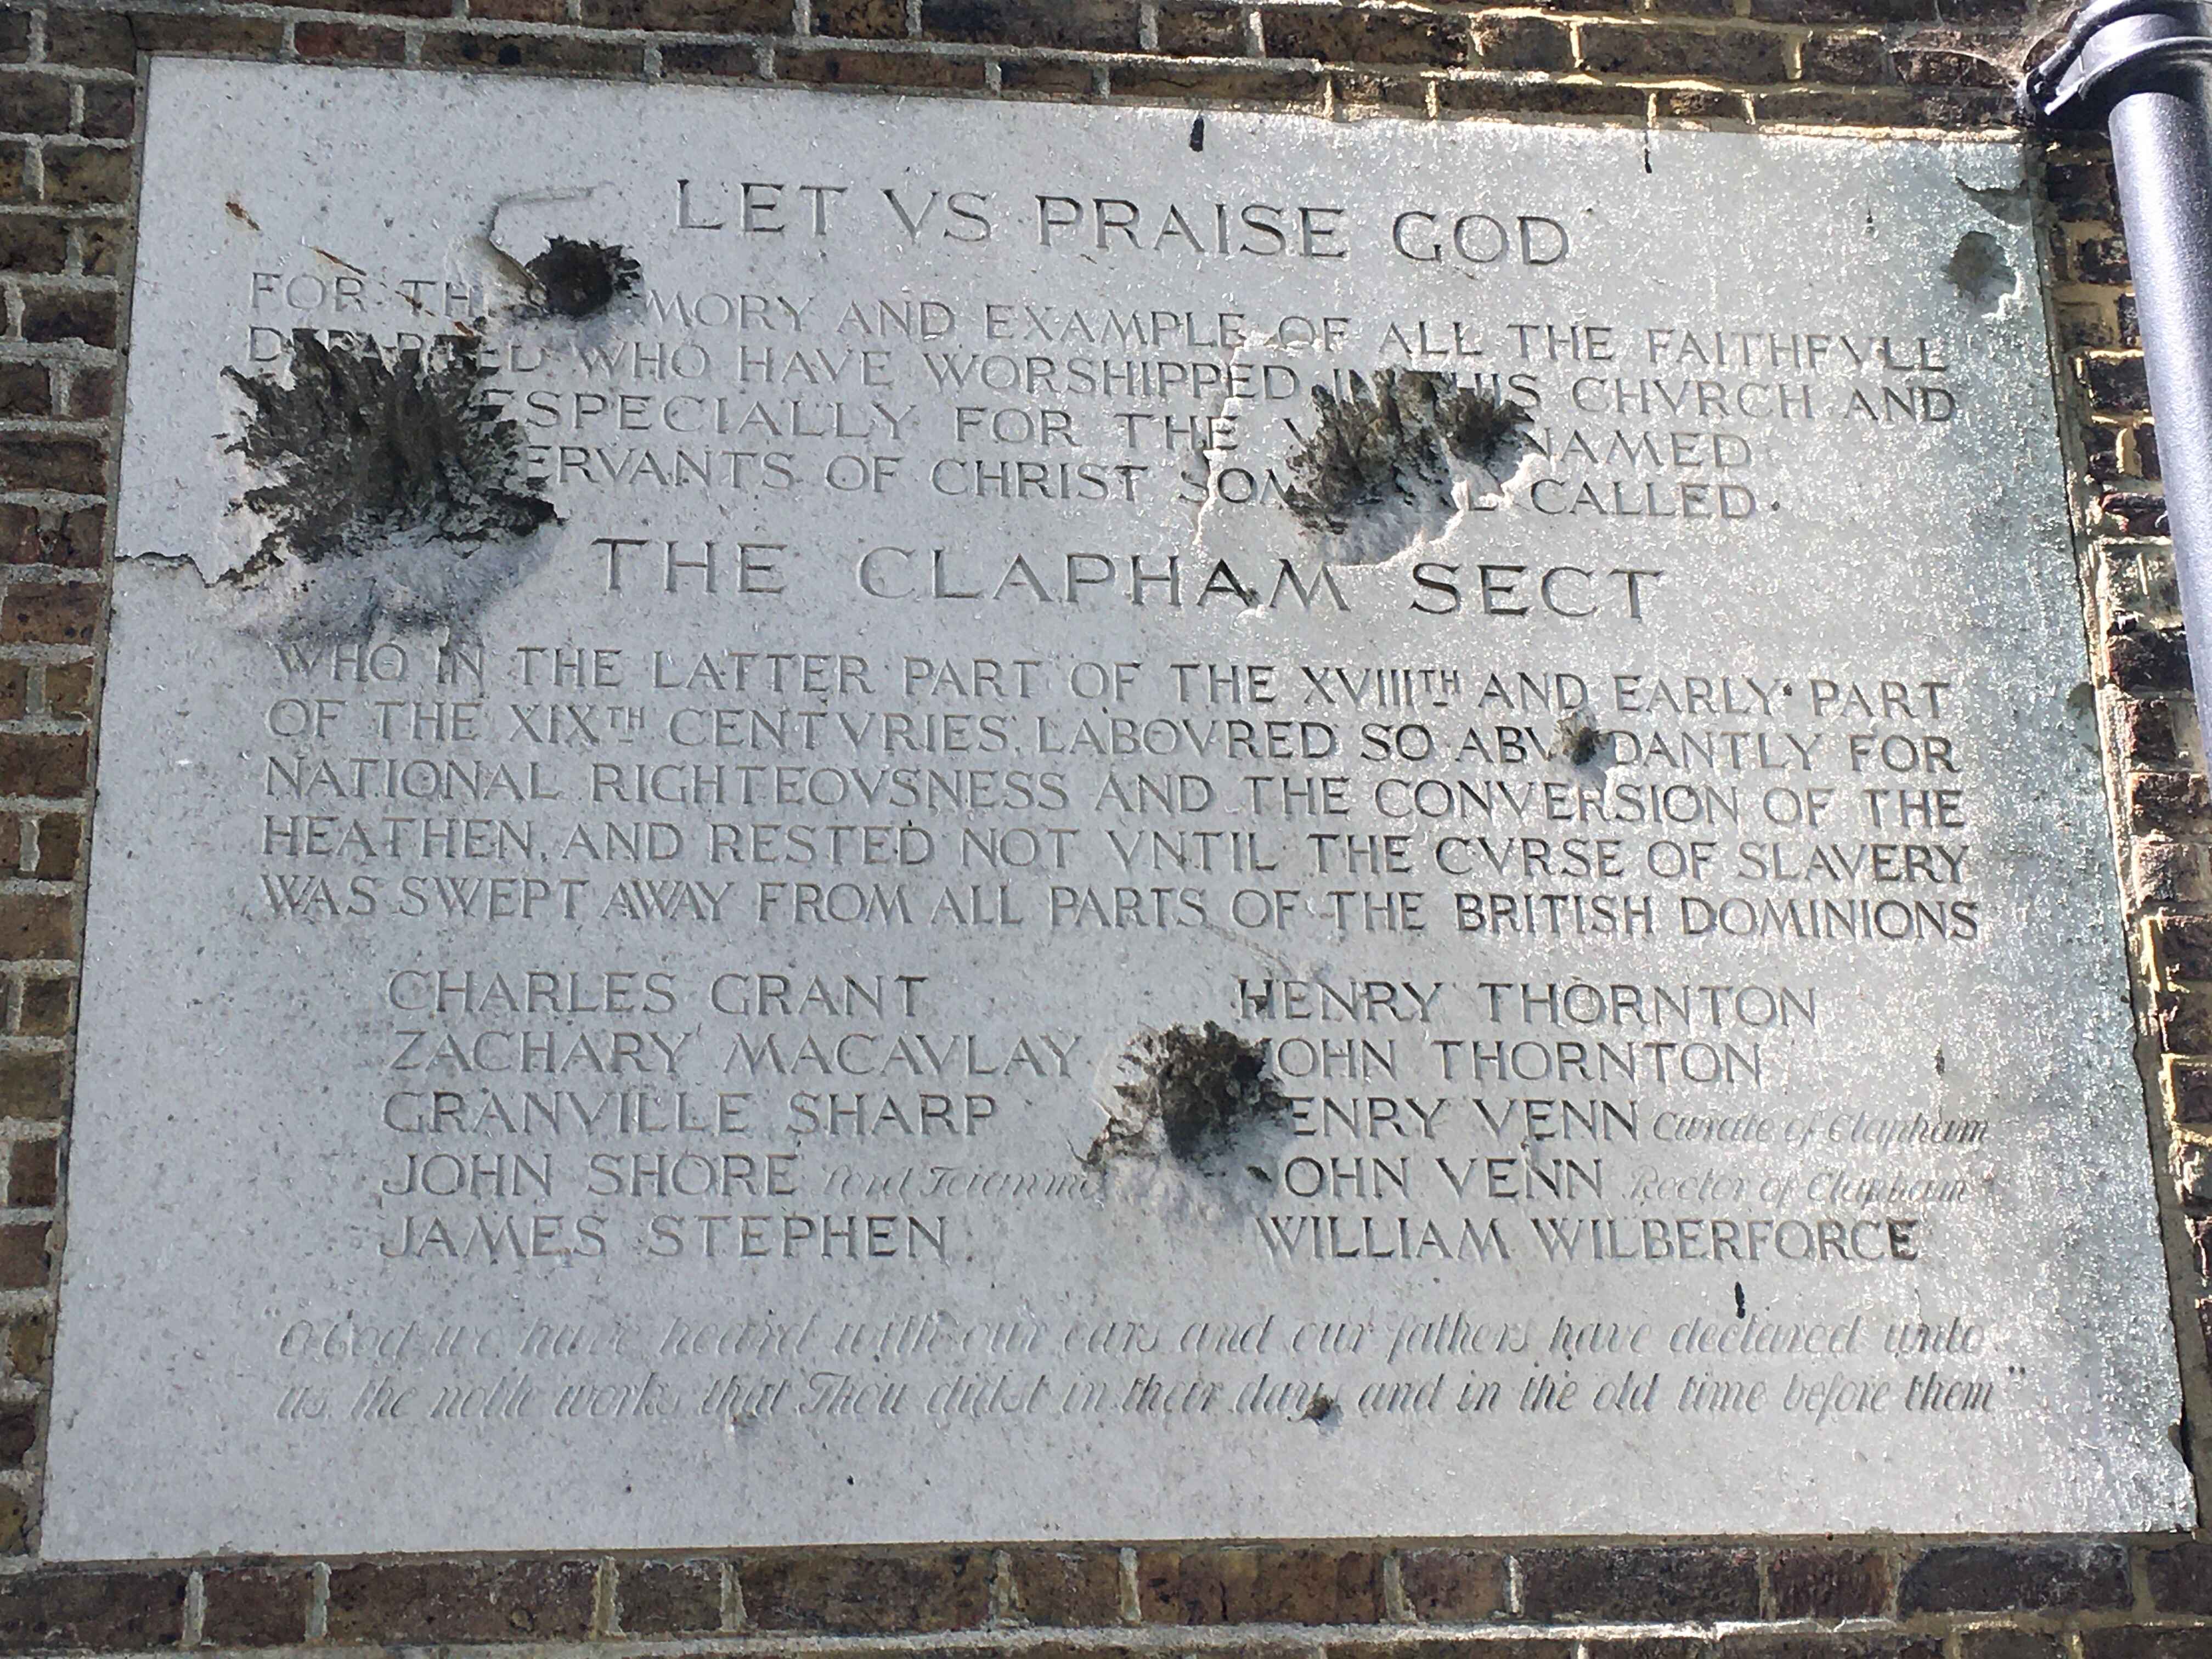 Stone plaque in brickwork. The plaque pitted with holes, partly obscuring the text. This includes the headings, Let us praise God and The Clapham Sect, with the names of the members ‘who…rested not until the curse of slavery was swept away’.